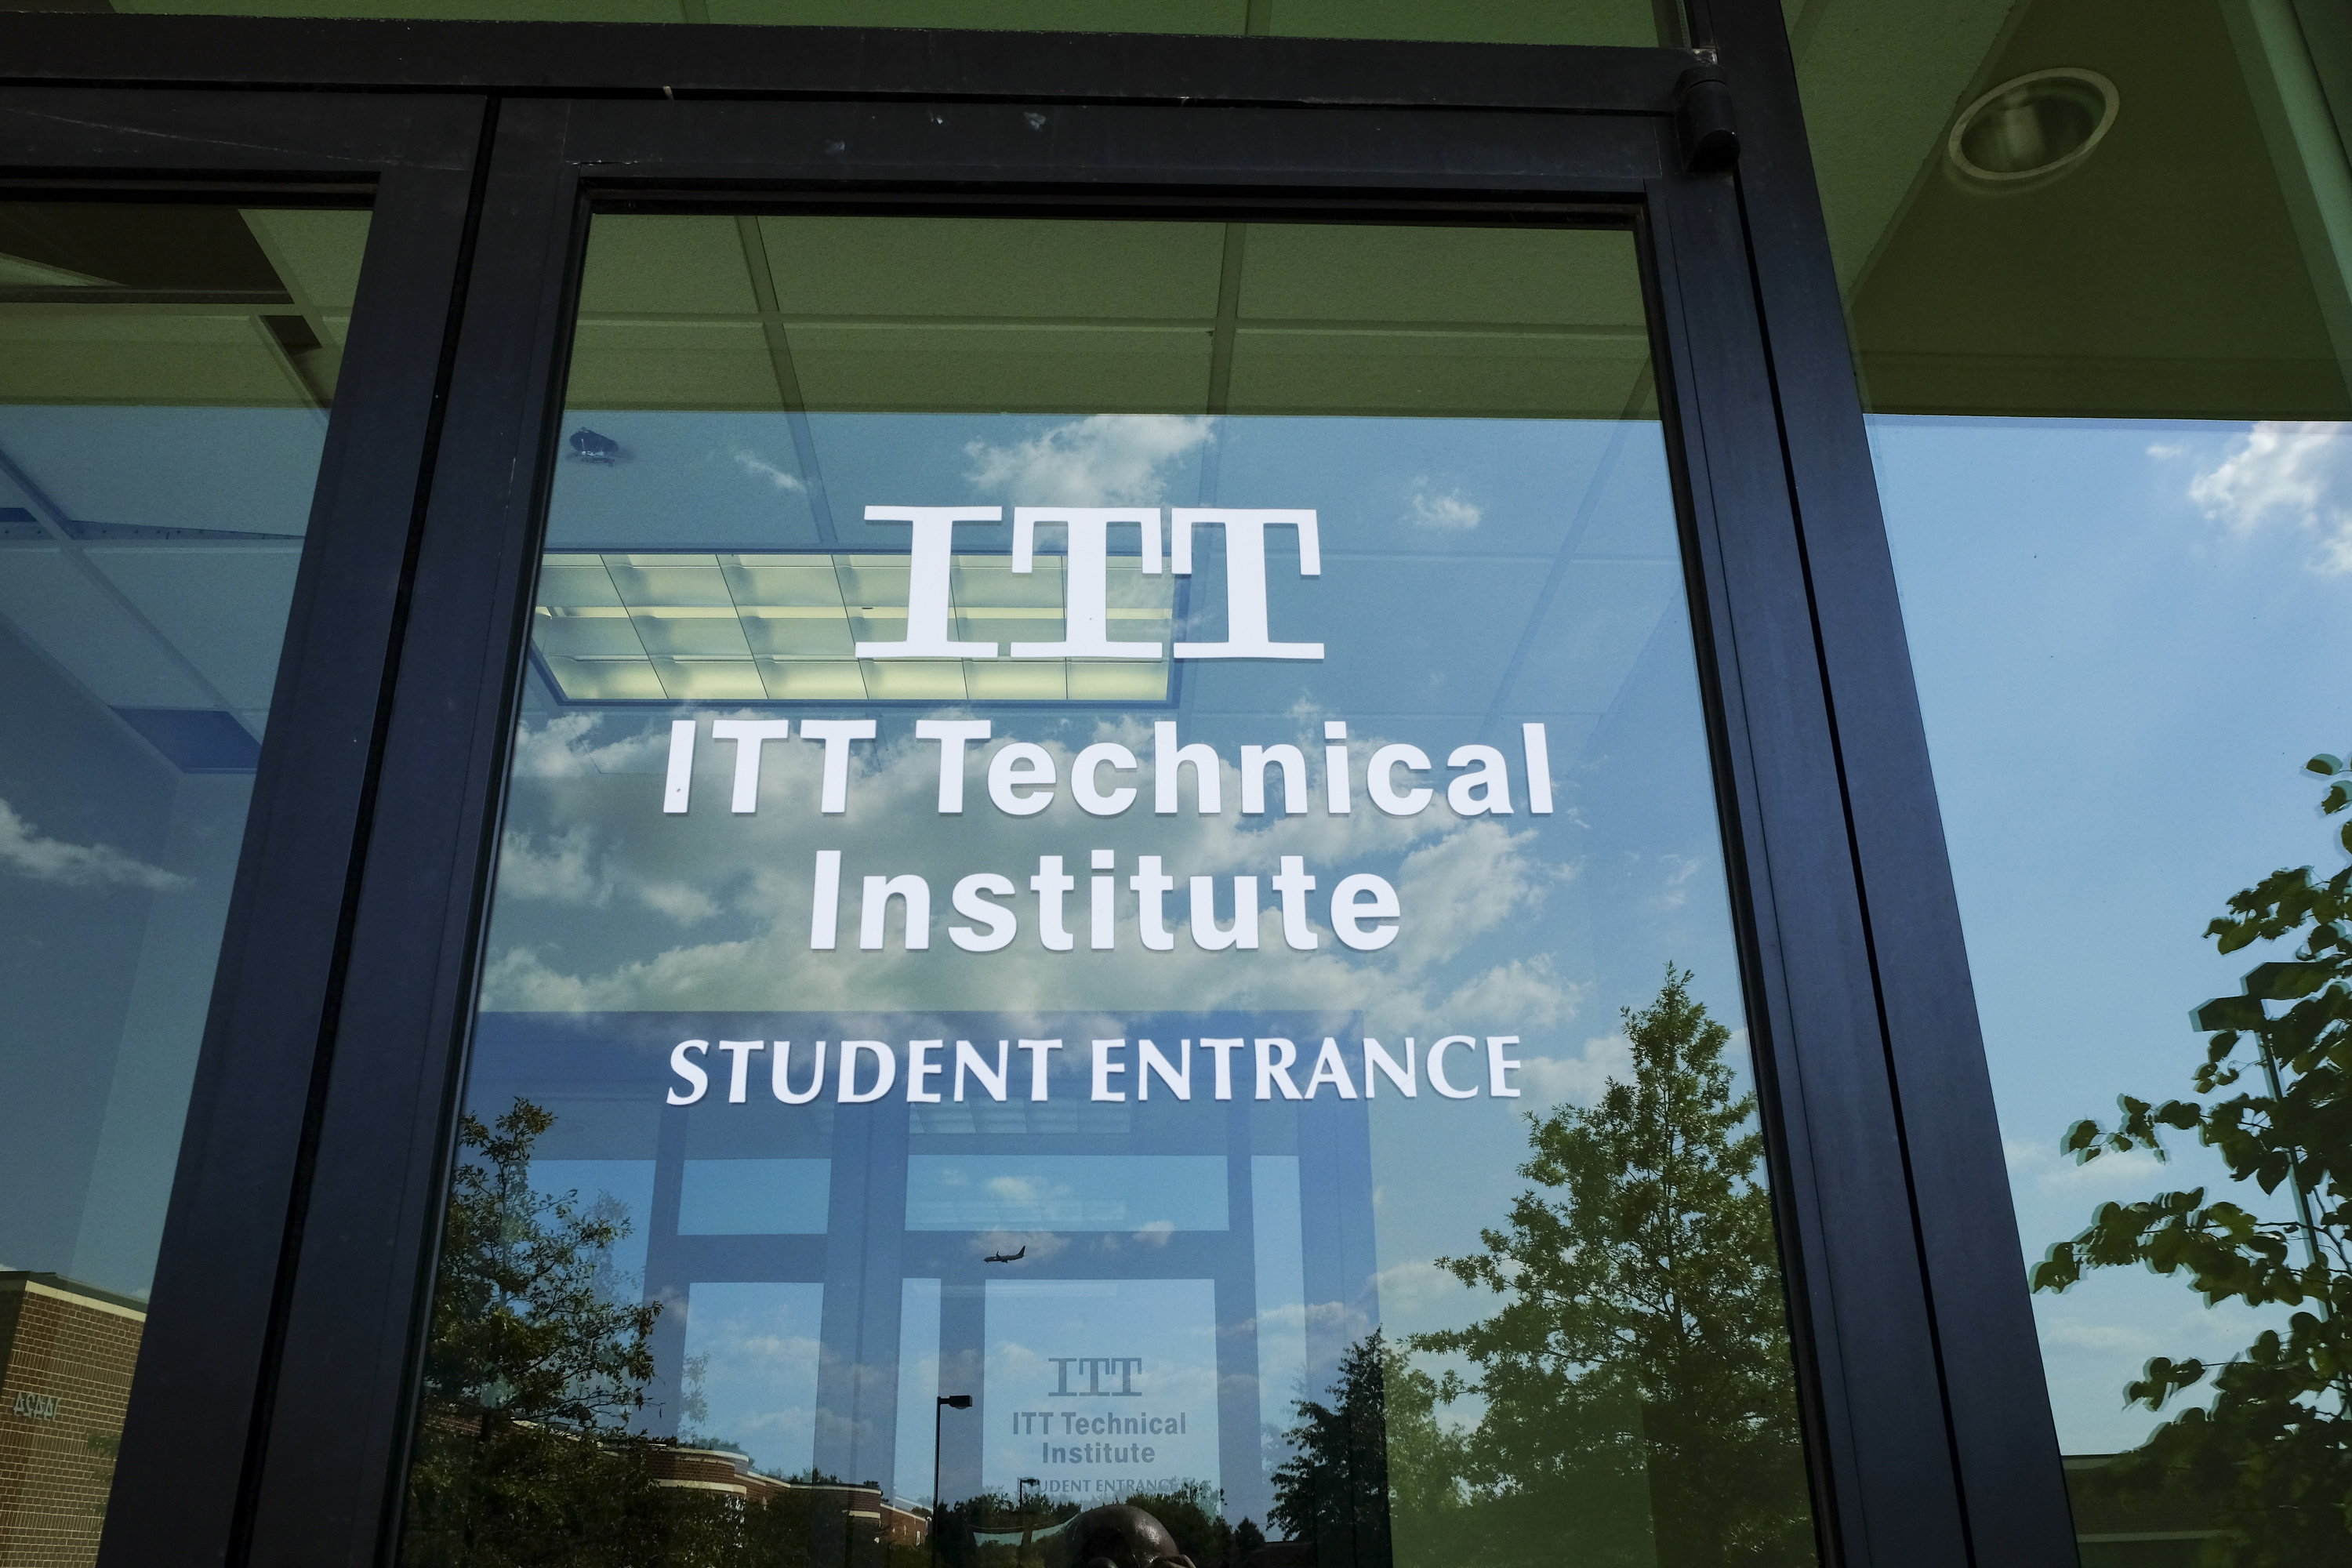 The Chantilly Campus of ITT Technical Institute sits closed and empty on Tuesday, September 6, 2016, in Chantilly, VA. (The Washington Post&mdash;The Washington Post/Getty Images)